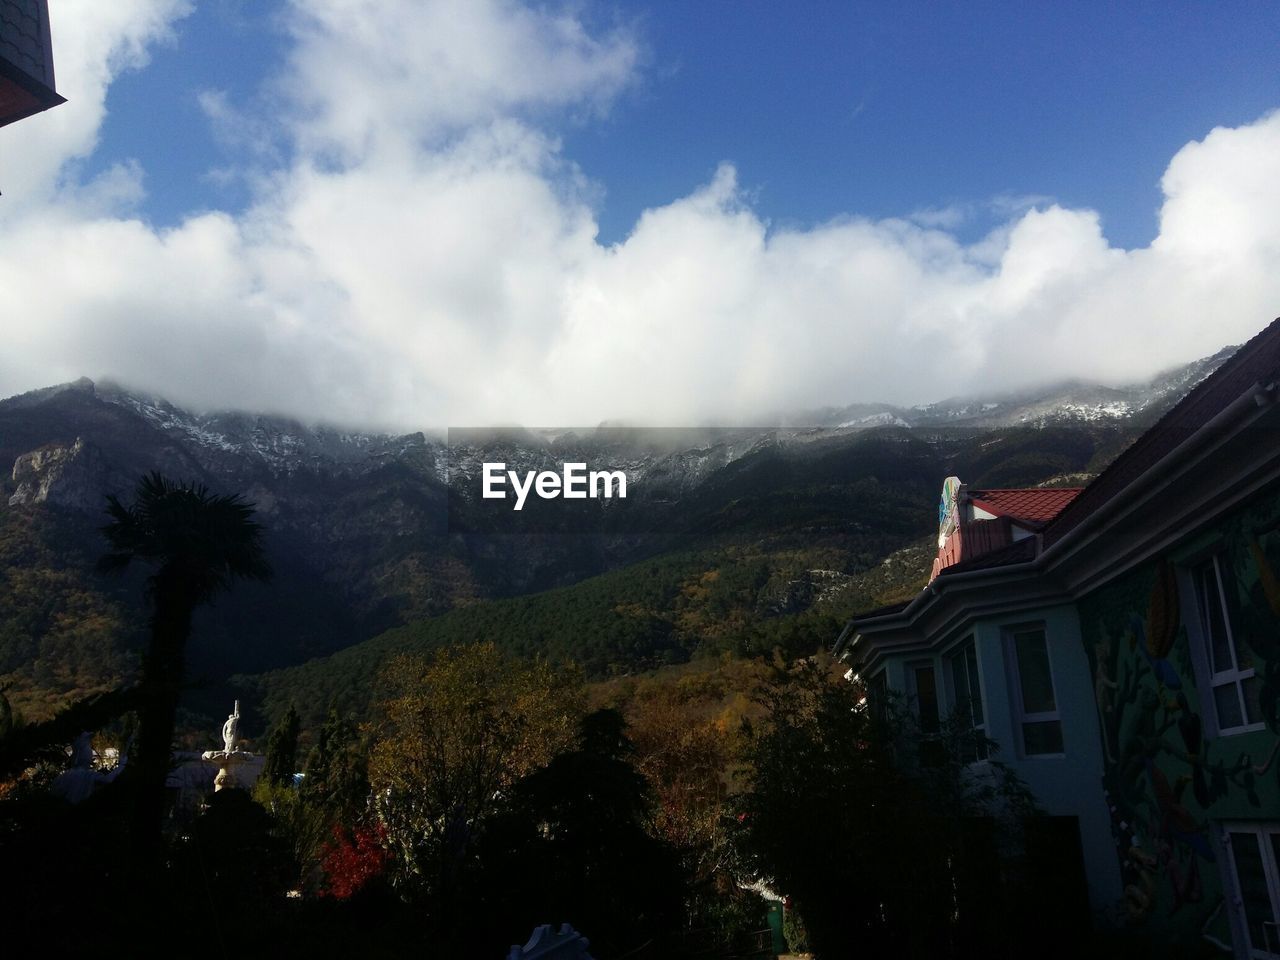 SCENIC VIEW OF MOUNTAIN AGAINST CLOUDY SKY